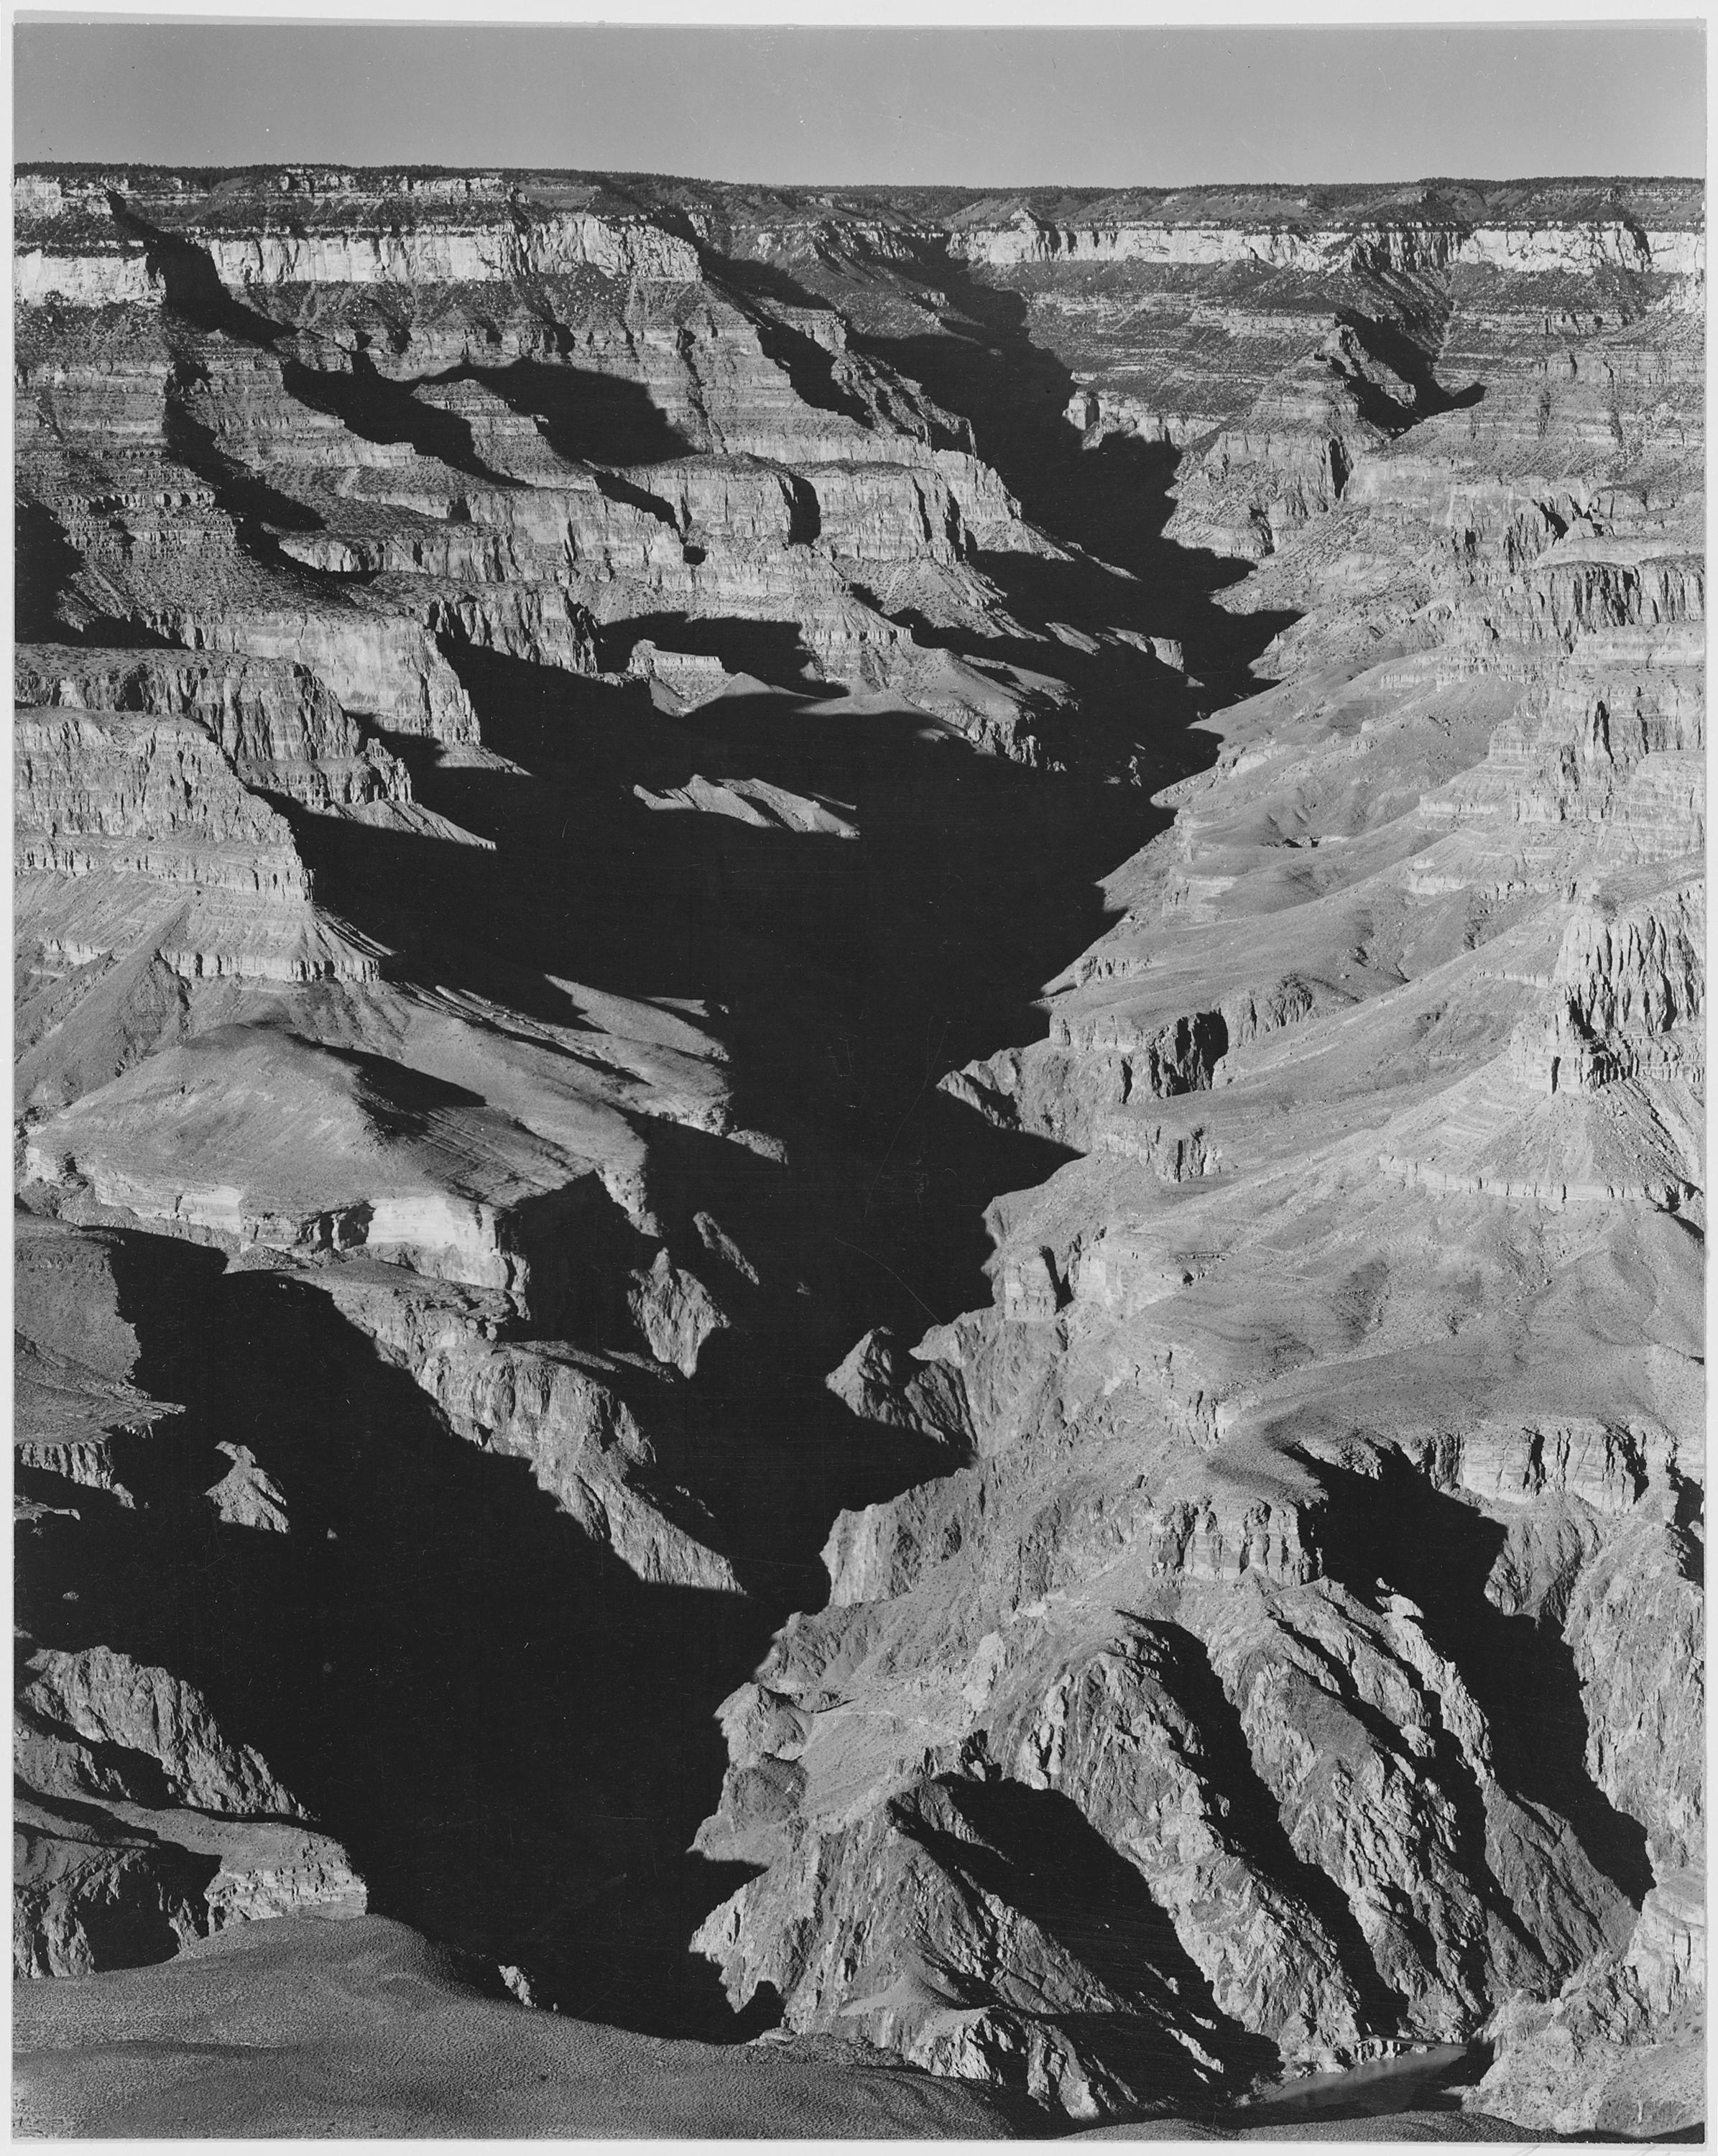 Ansel Adams - National Archives 79-AA-F08